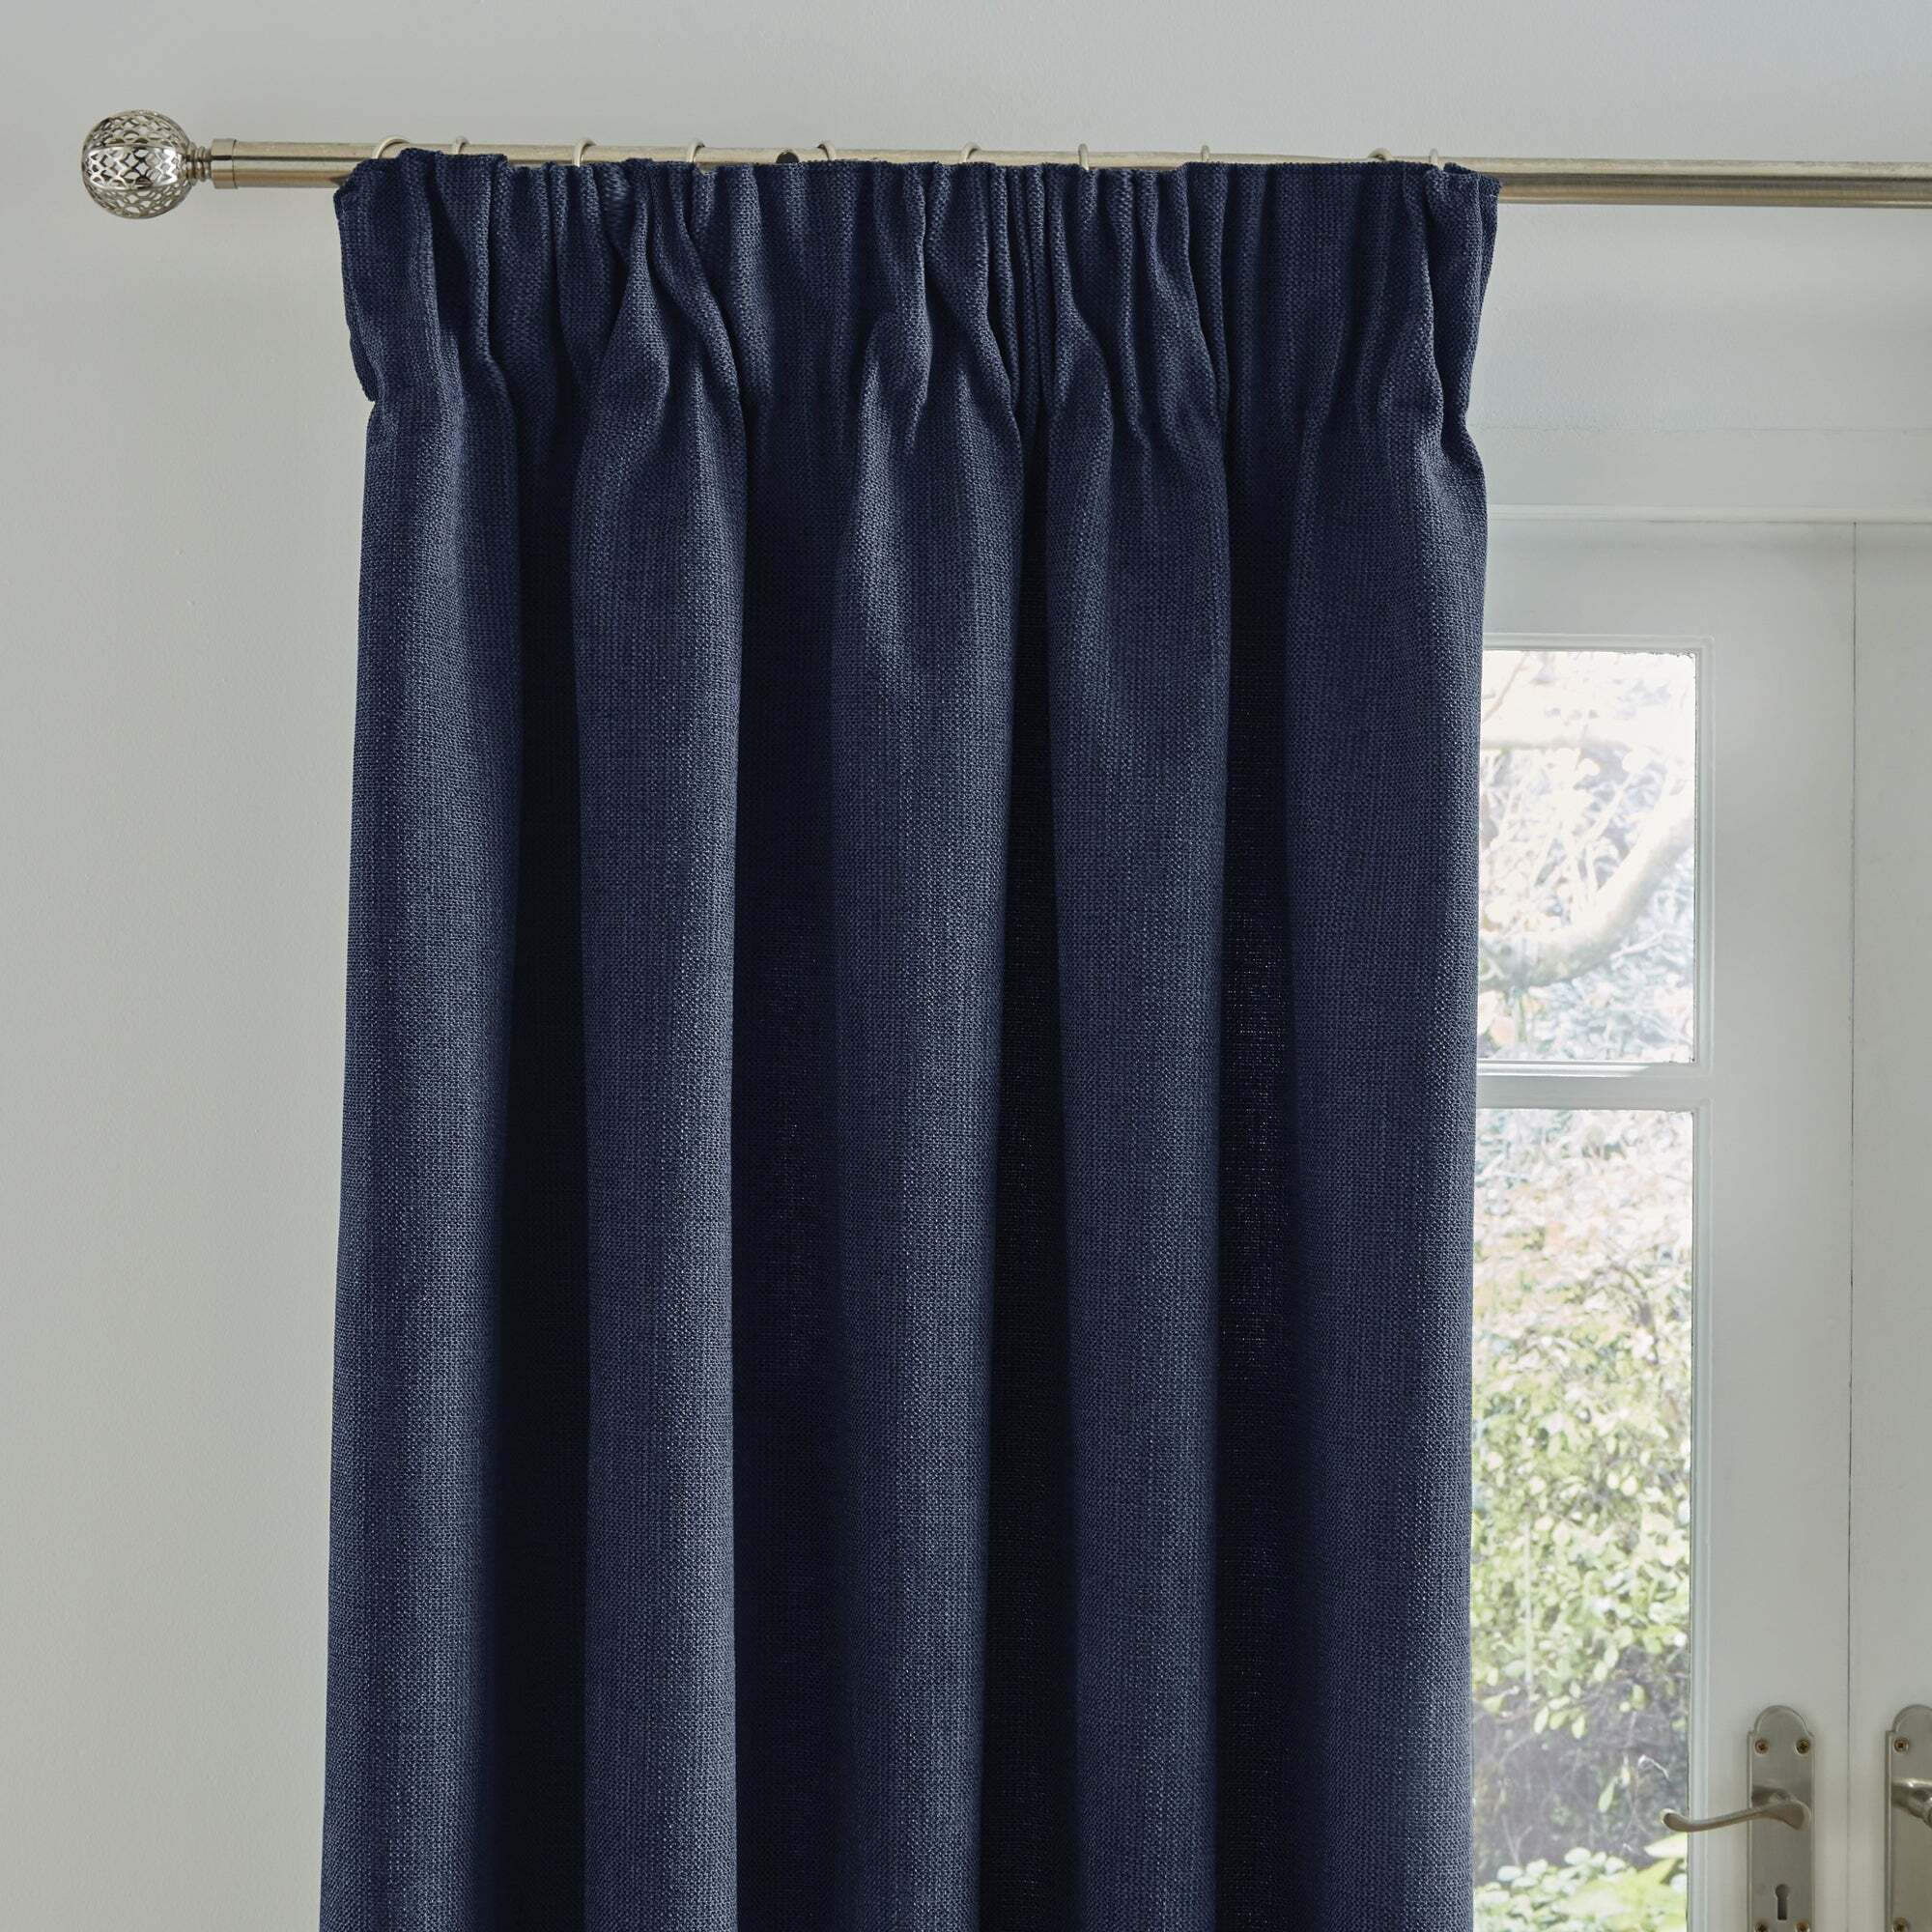 Wynter Navy Thermal Pencil Pleat Curtains Navy Blue